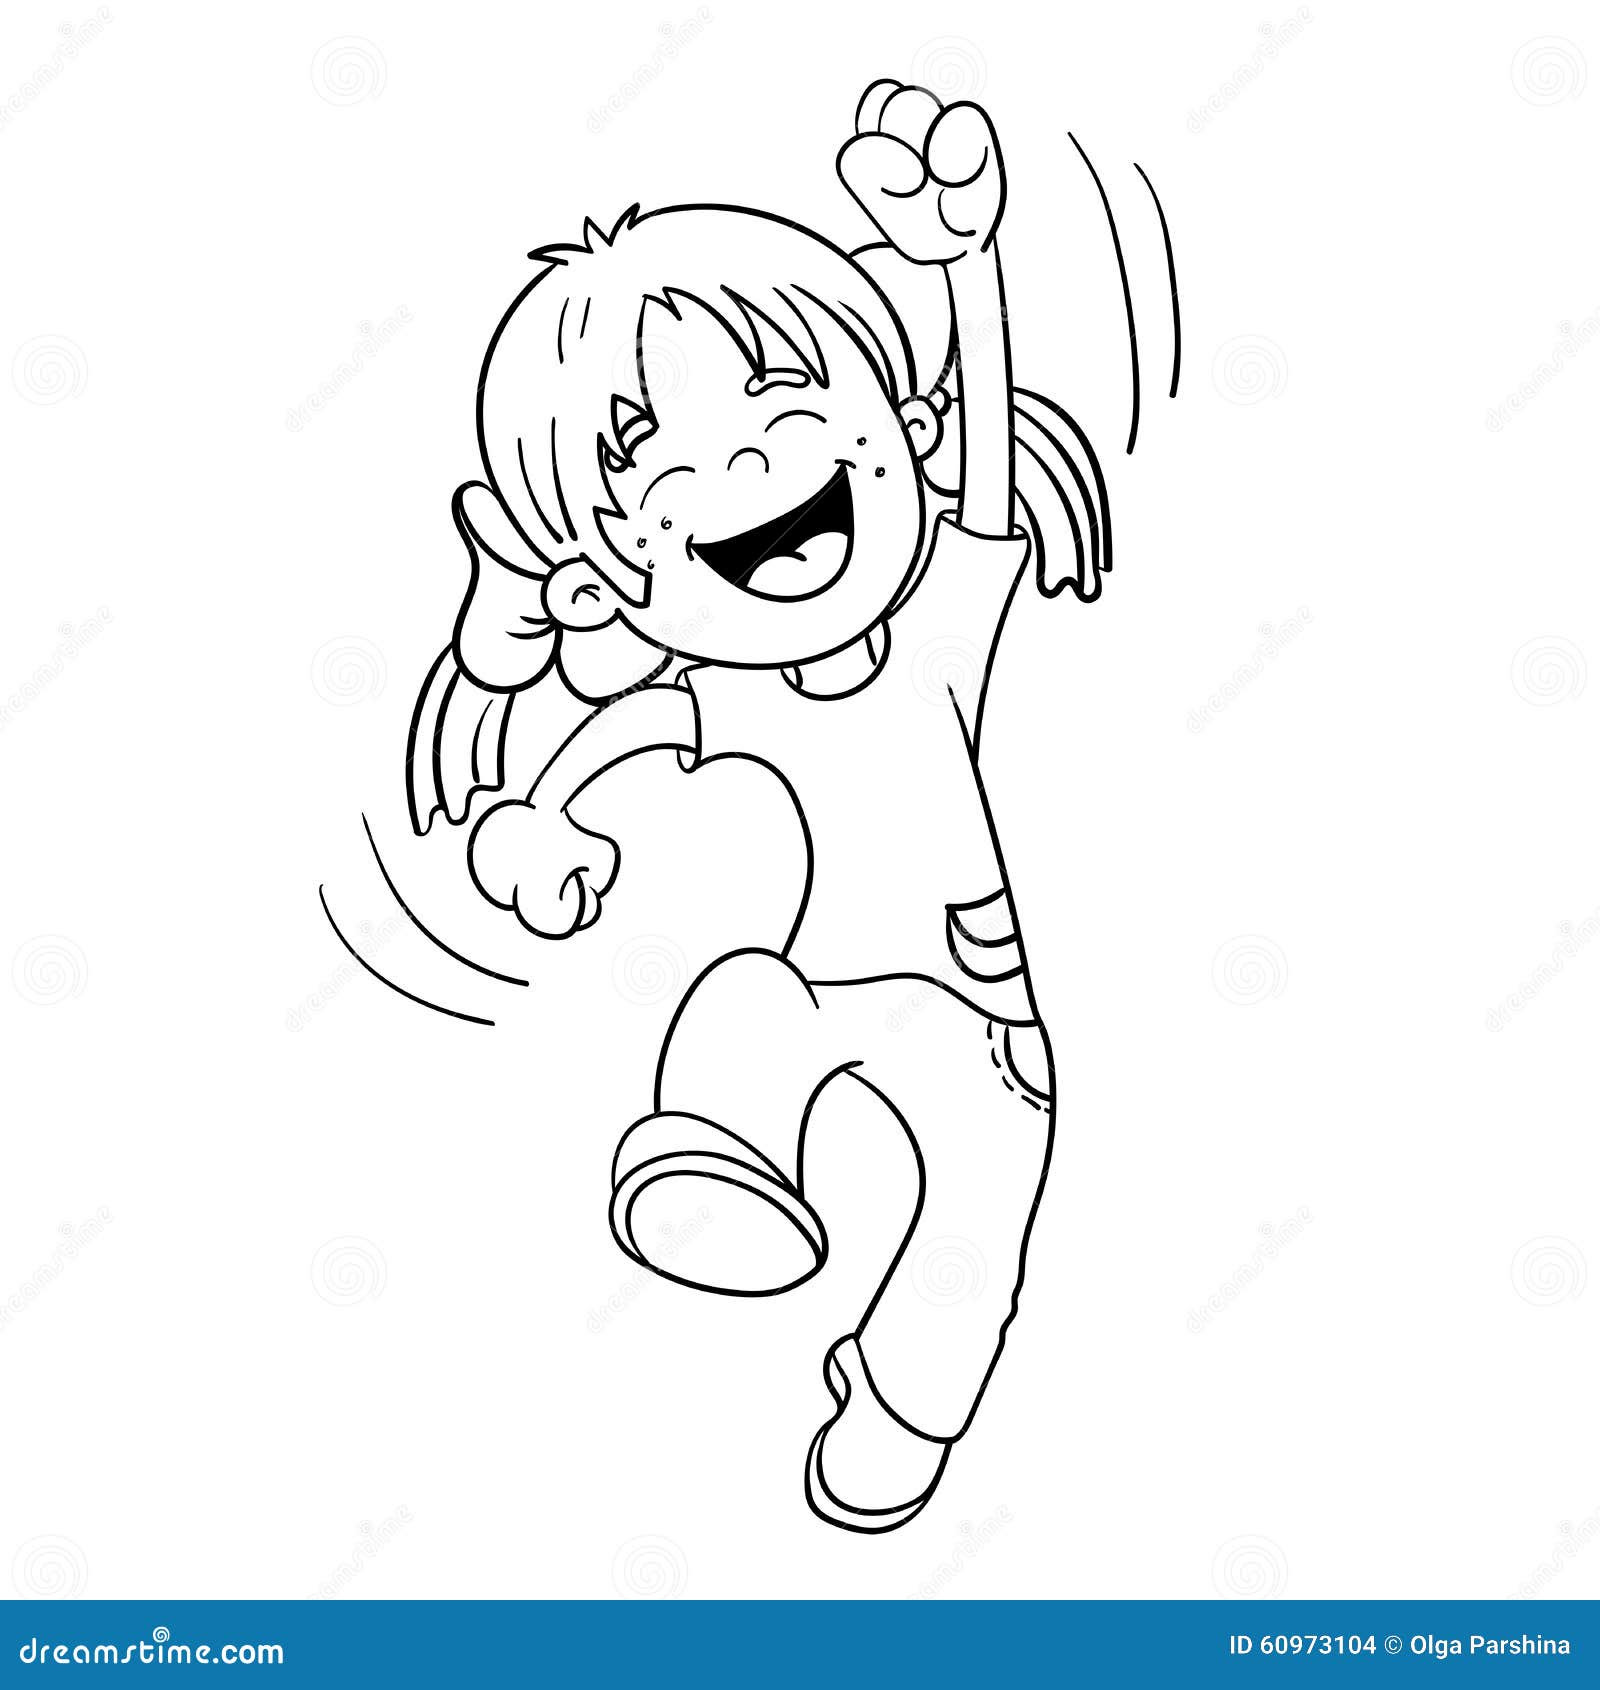 Download 249+ Crafts Jump For Joy Cartooning Craft Coloring Pages PNG